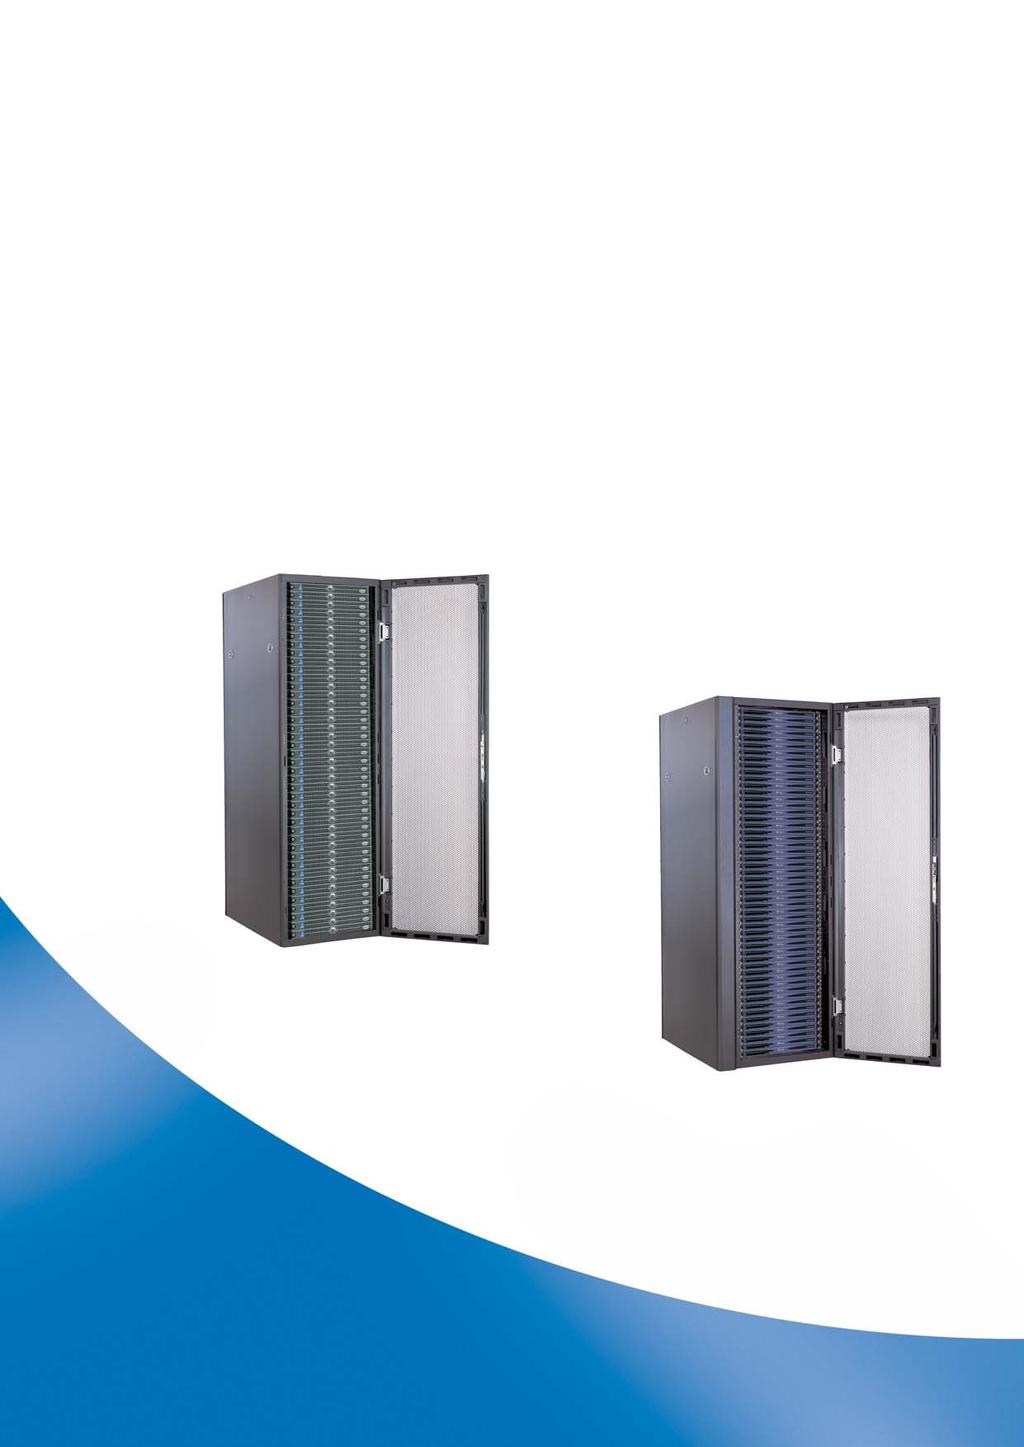 Designed for scaleable growth The SR Series UltraRack SR Series - Universal rack enclosure solutions for advanced storage, cooling, power distribution, cable management and security in data centres